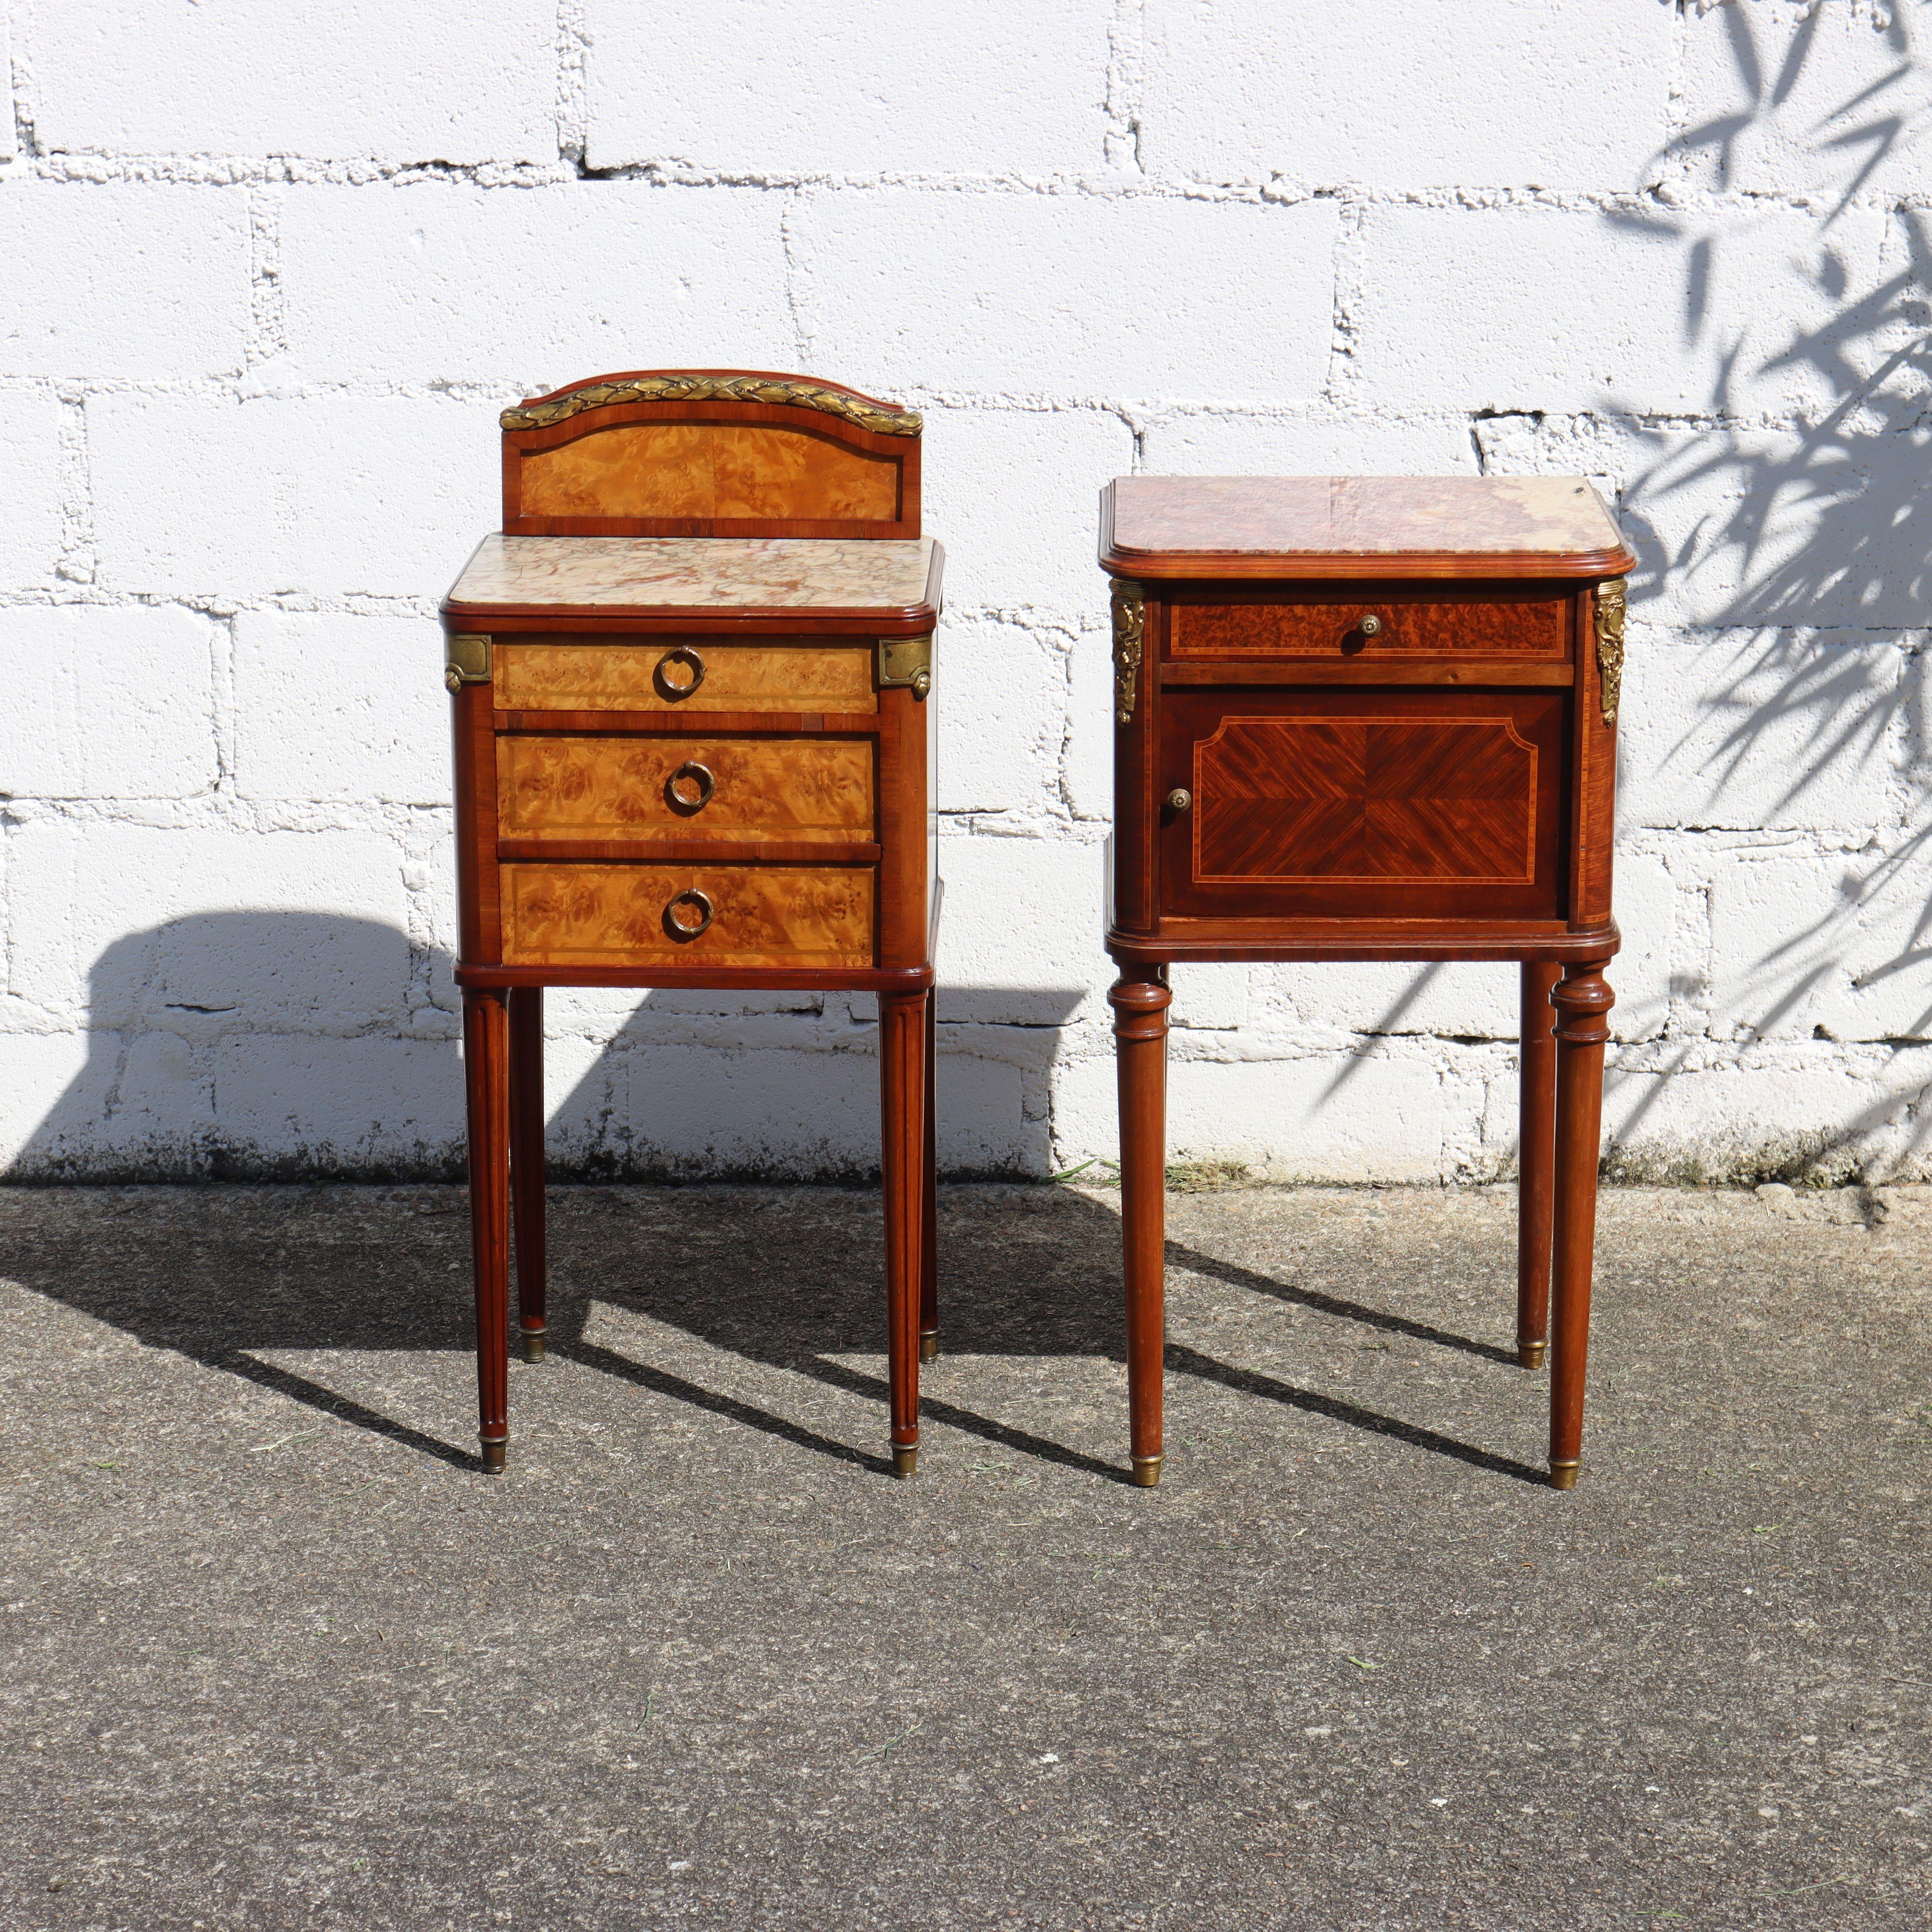 Pair of 2 French Antique Louis XVI Rosewood Marquetry Marble Top Nightstands from the 20s
2 different Cabinet Maker Masterpieces , which we offer as a Pair.

1) Solid Mahogany Bedside Table with high-quality Marquetry on the Front and both Sides and